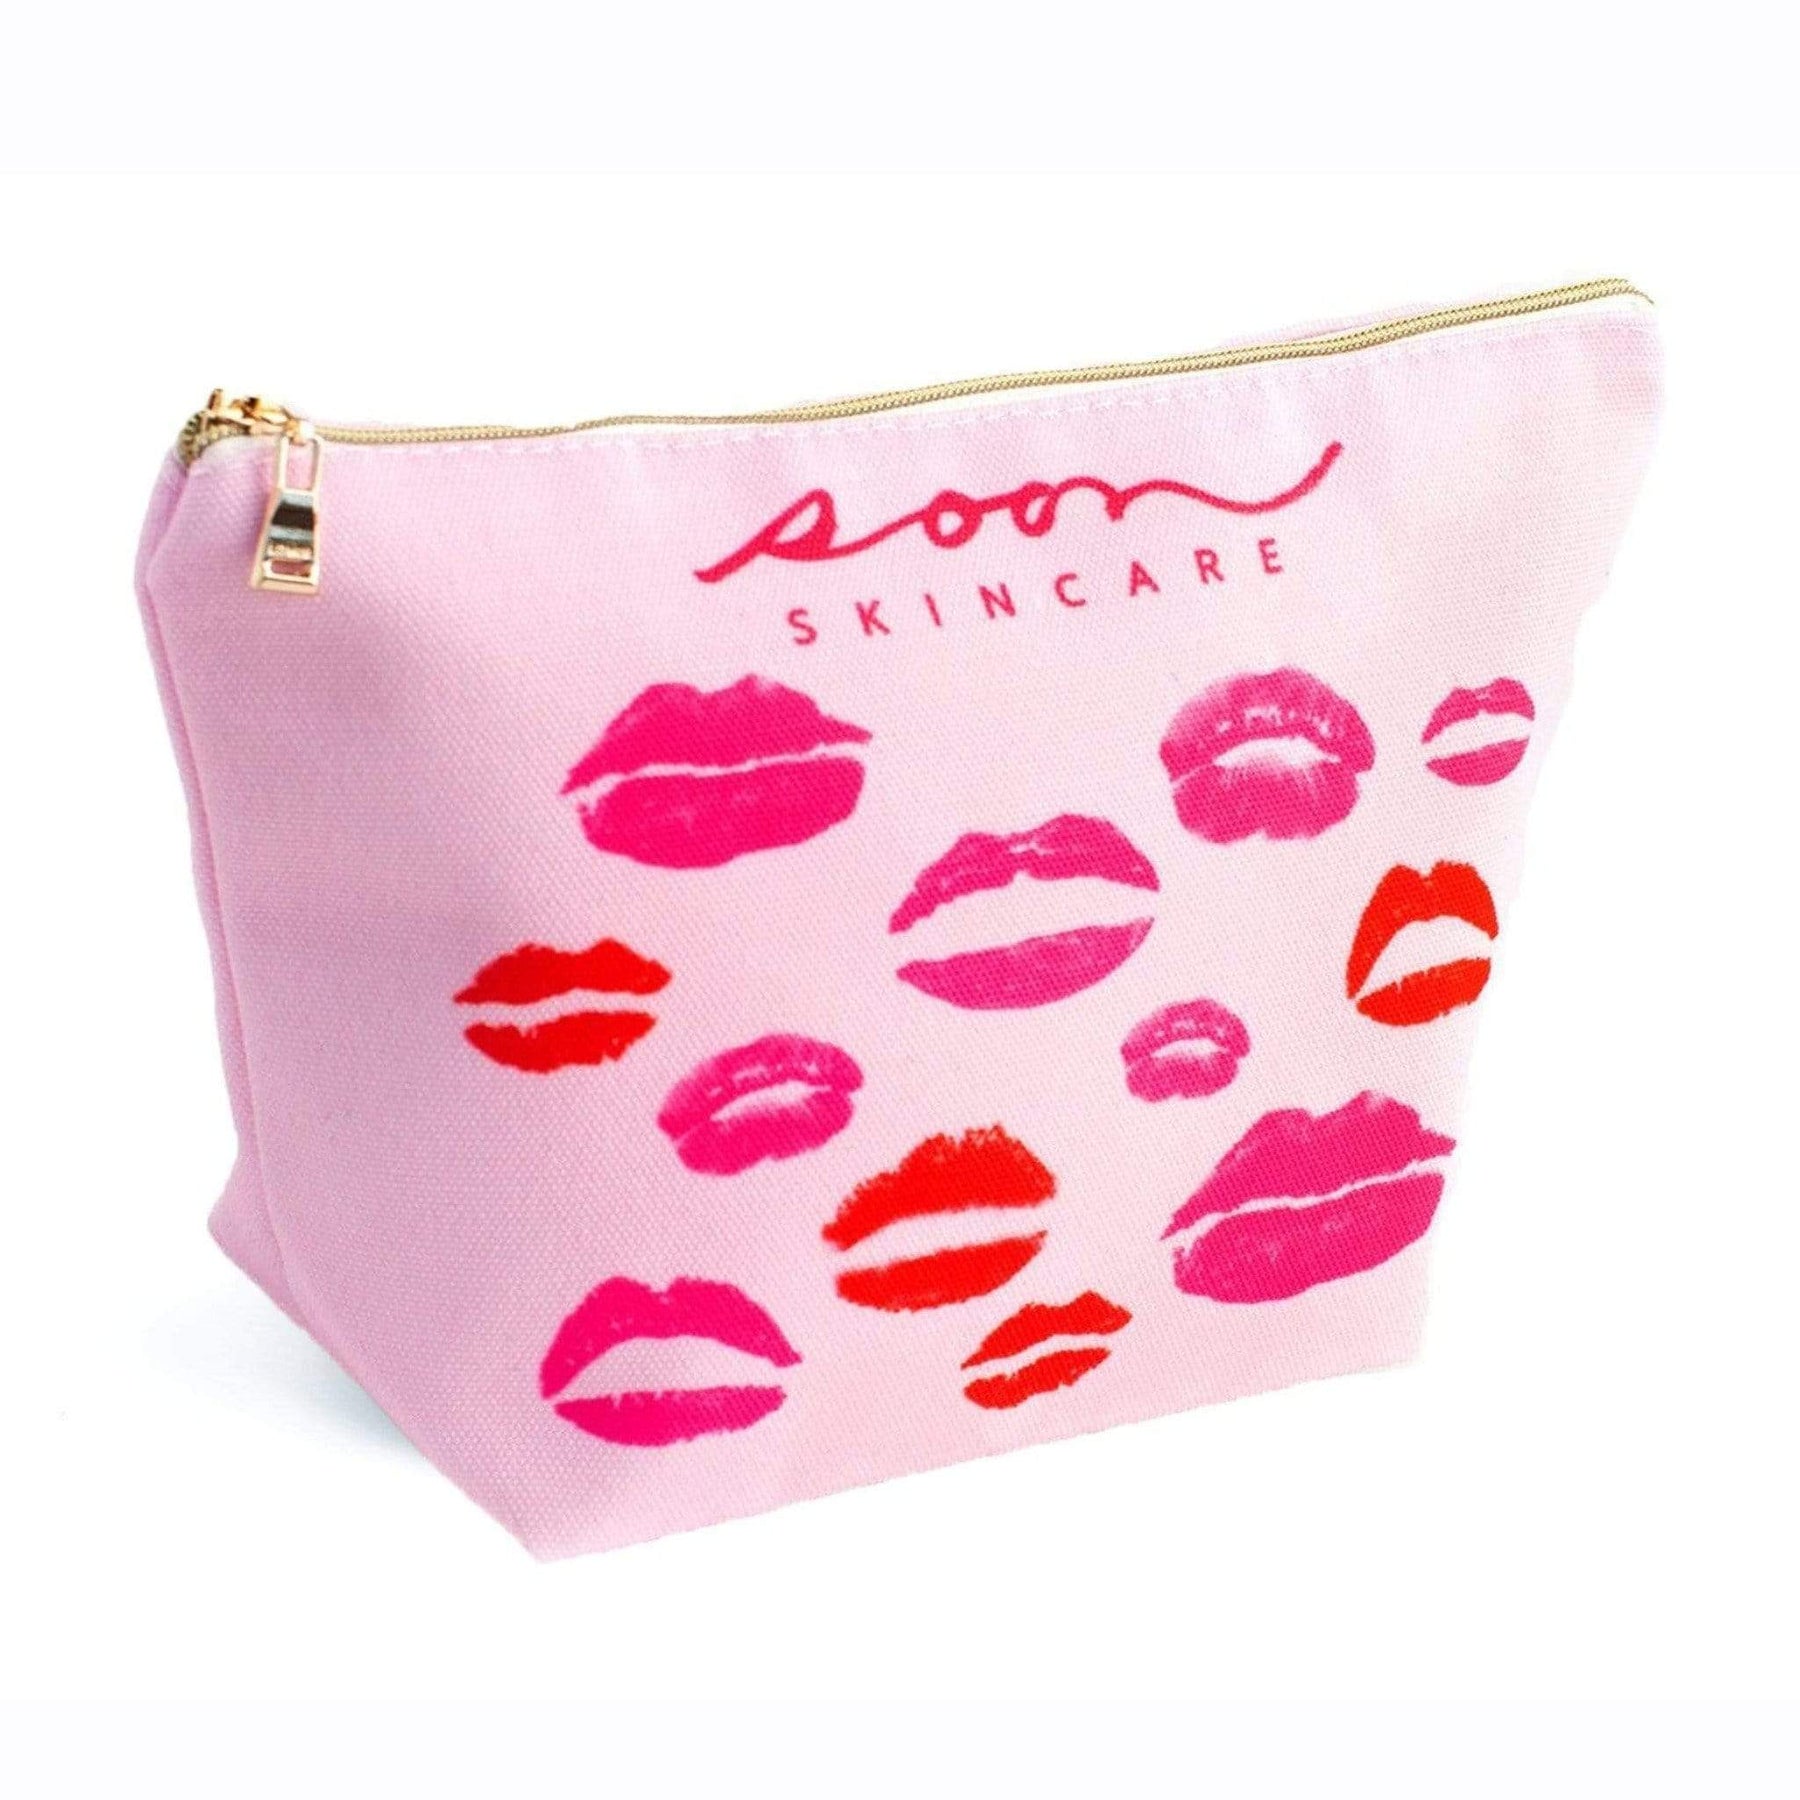 Red Lips Designer Clutch: Elegant Leather Hot Pink Evening Clutch With  Chain Strap For Women Available In From Guonei, $10.65 | DHgate.Com